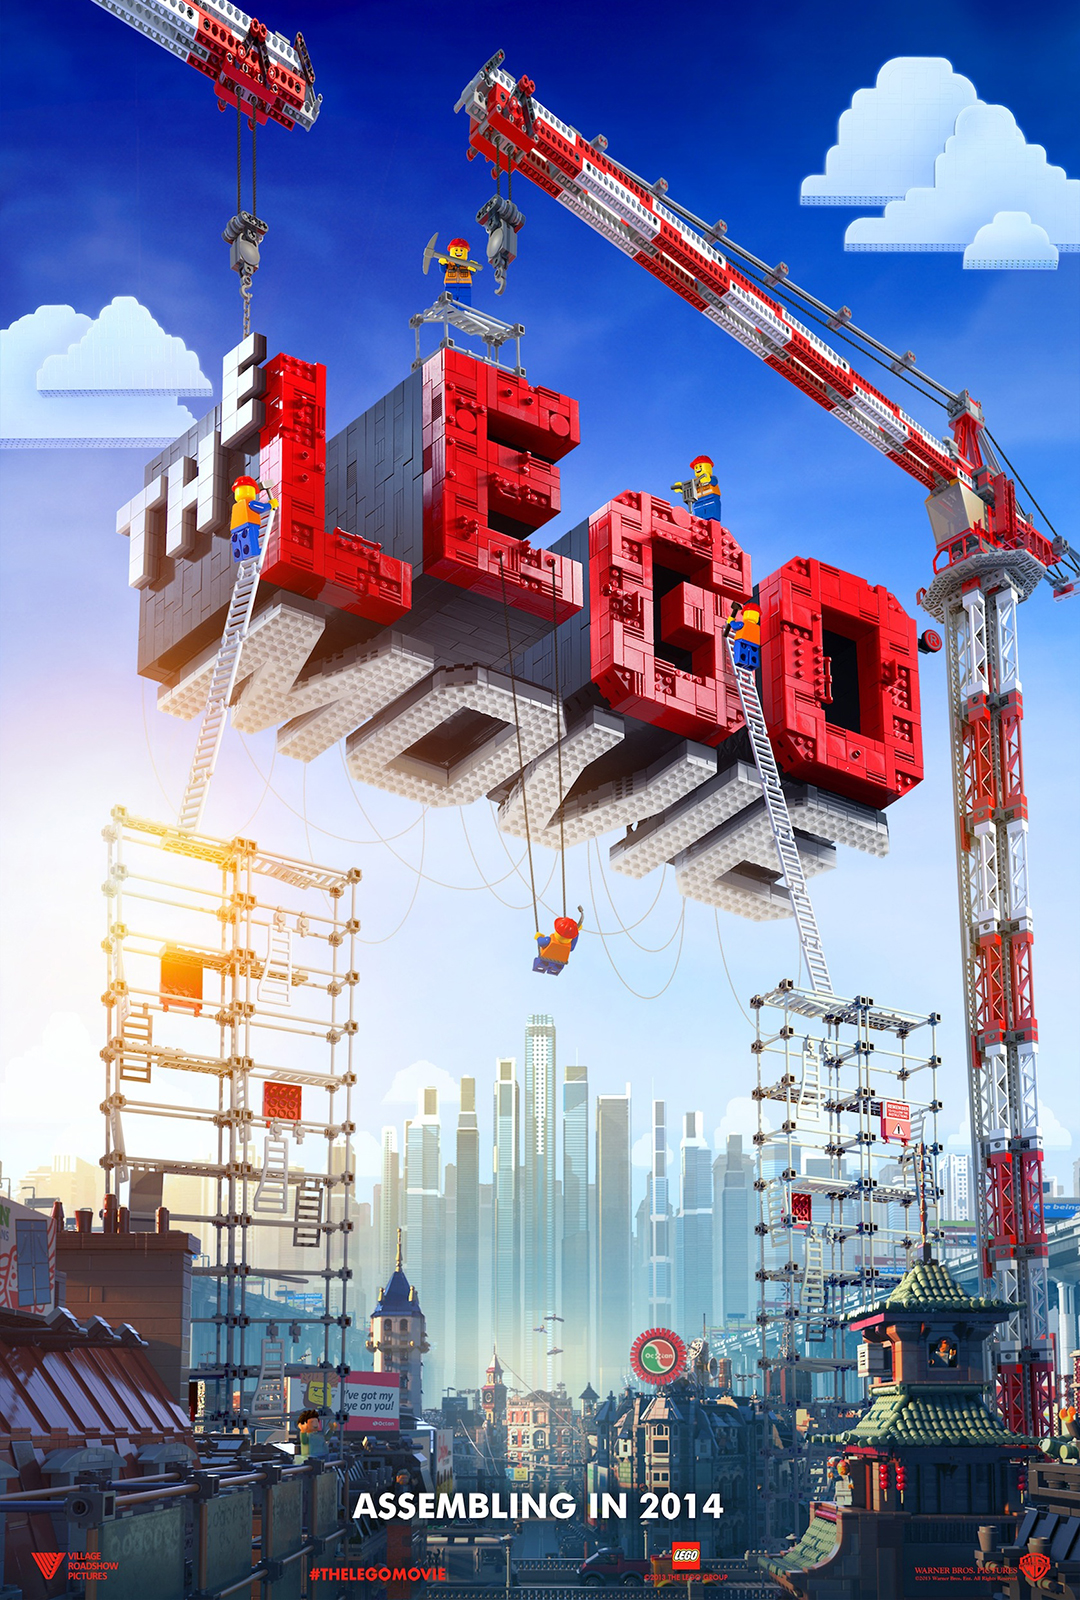 THE LEGO MOVIE Posters By Animal Logic - CG Animation Blog